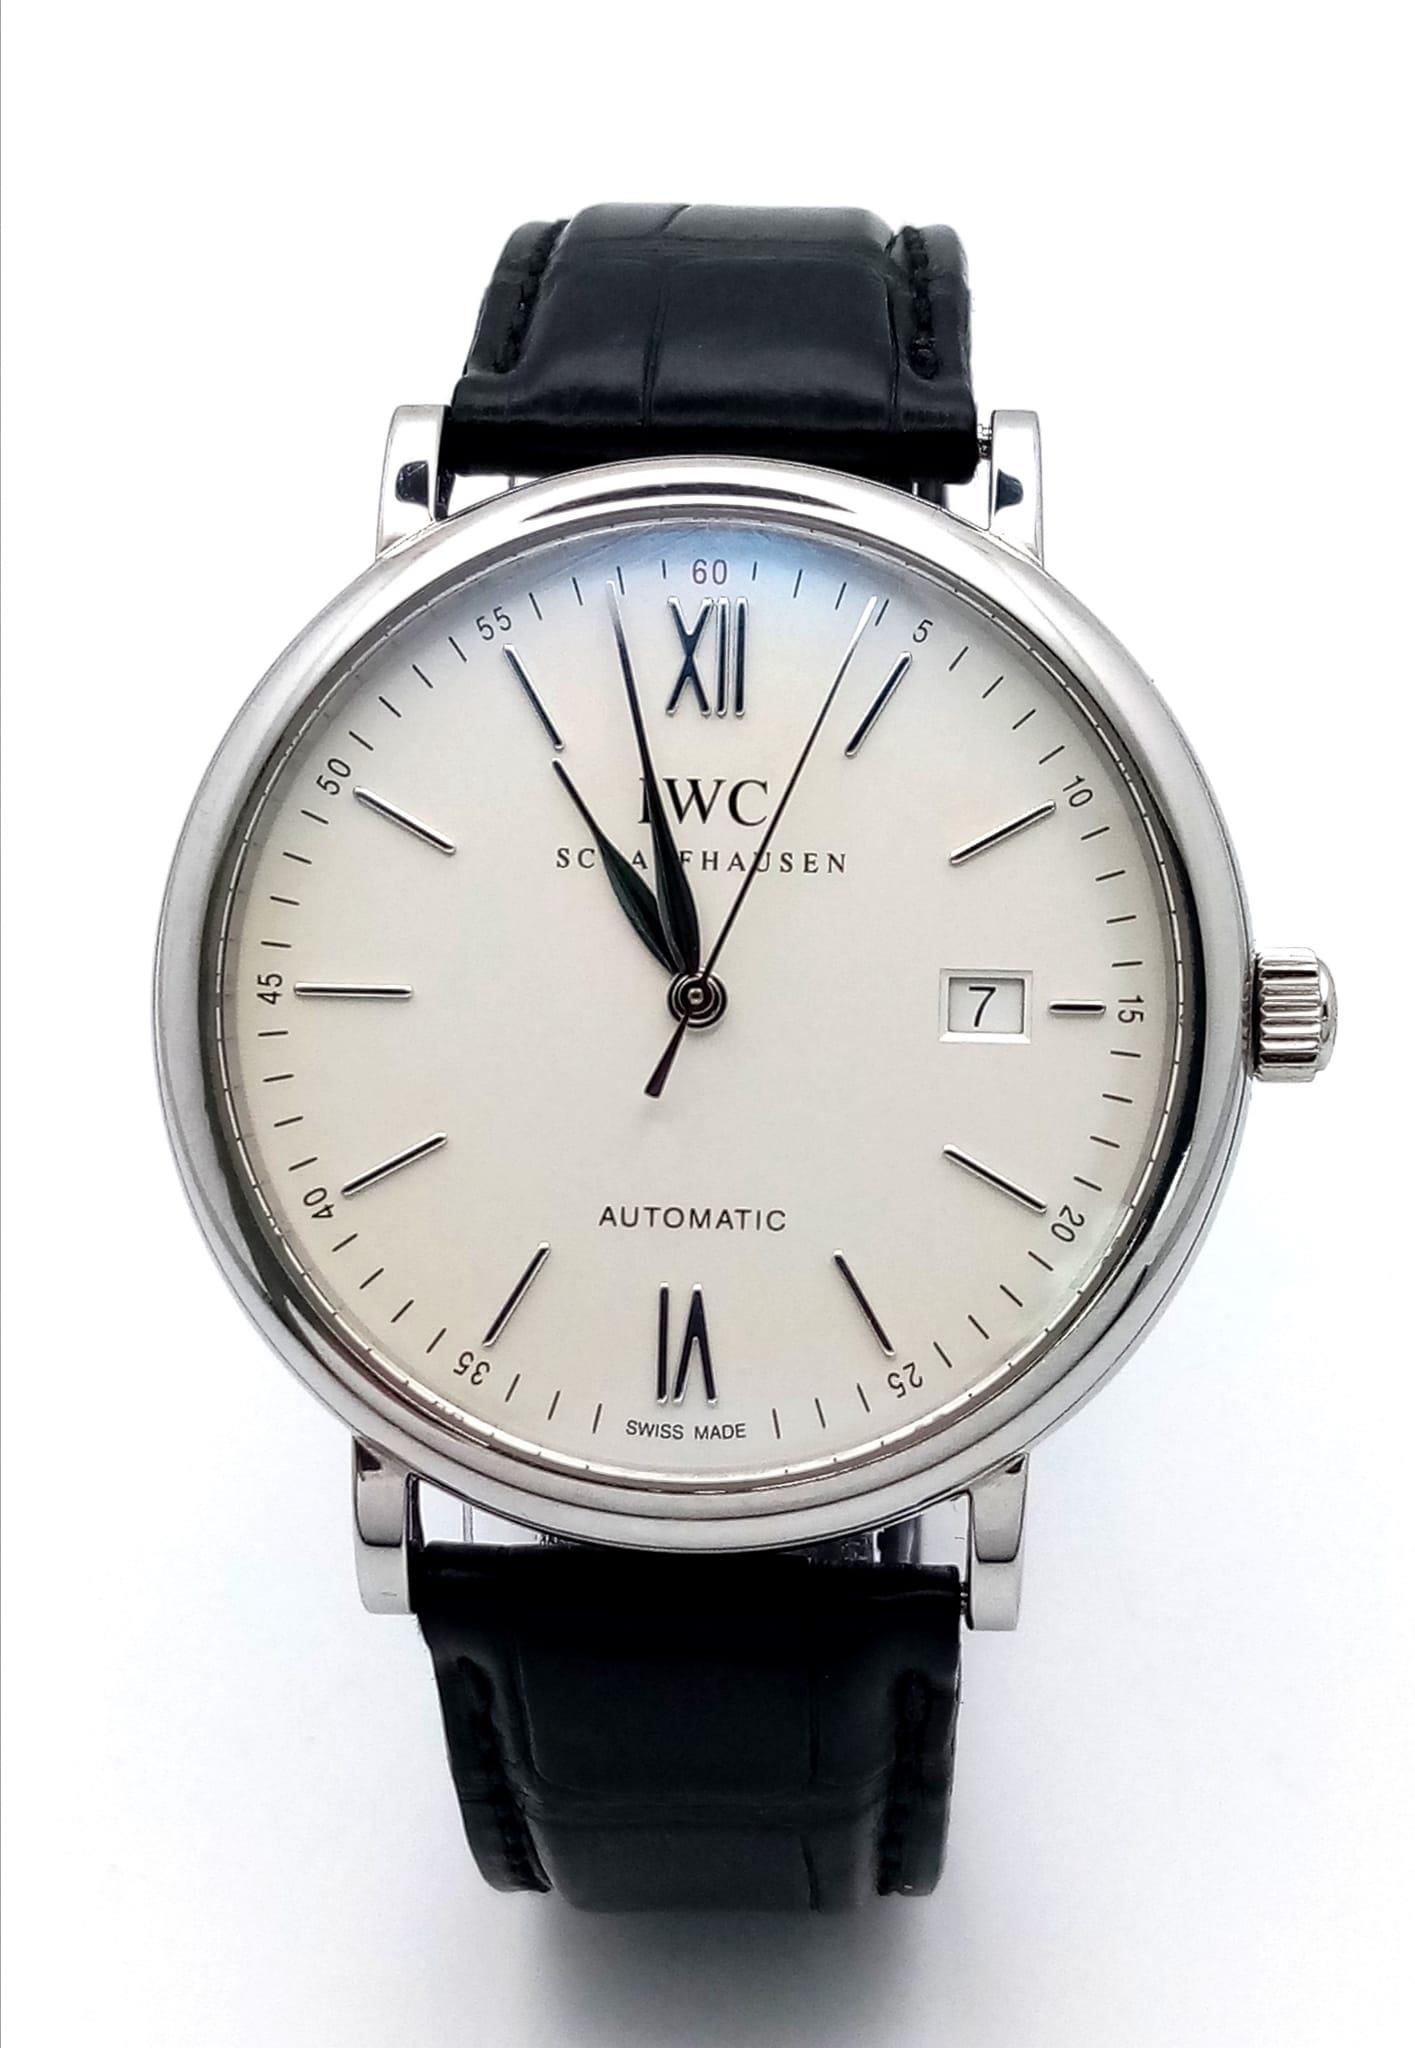 AN I.W.C. SCAFFHAUSEN AUTOMATIC GENTS WATCH IN STAINLESS STEEL WITH CREAM DIAL AND DATE BOX . 40mm